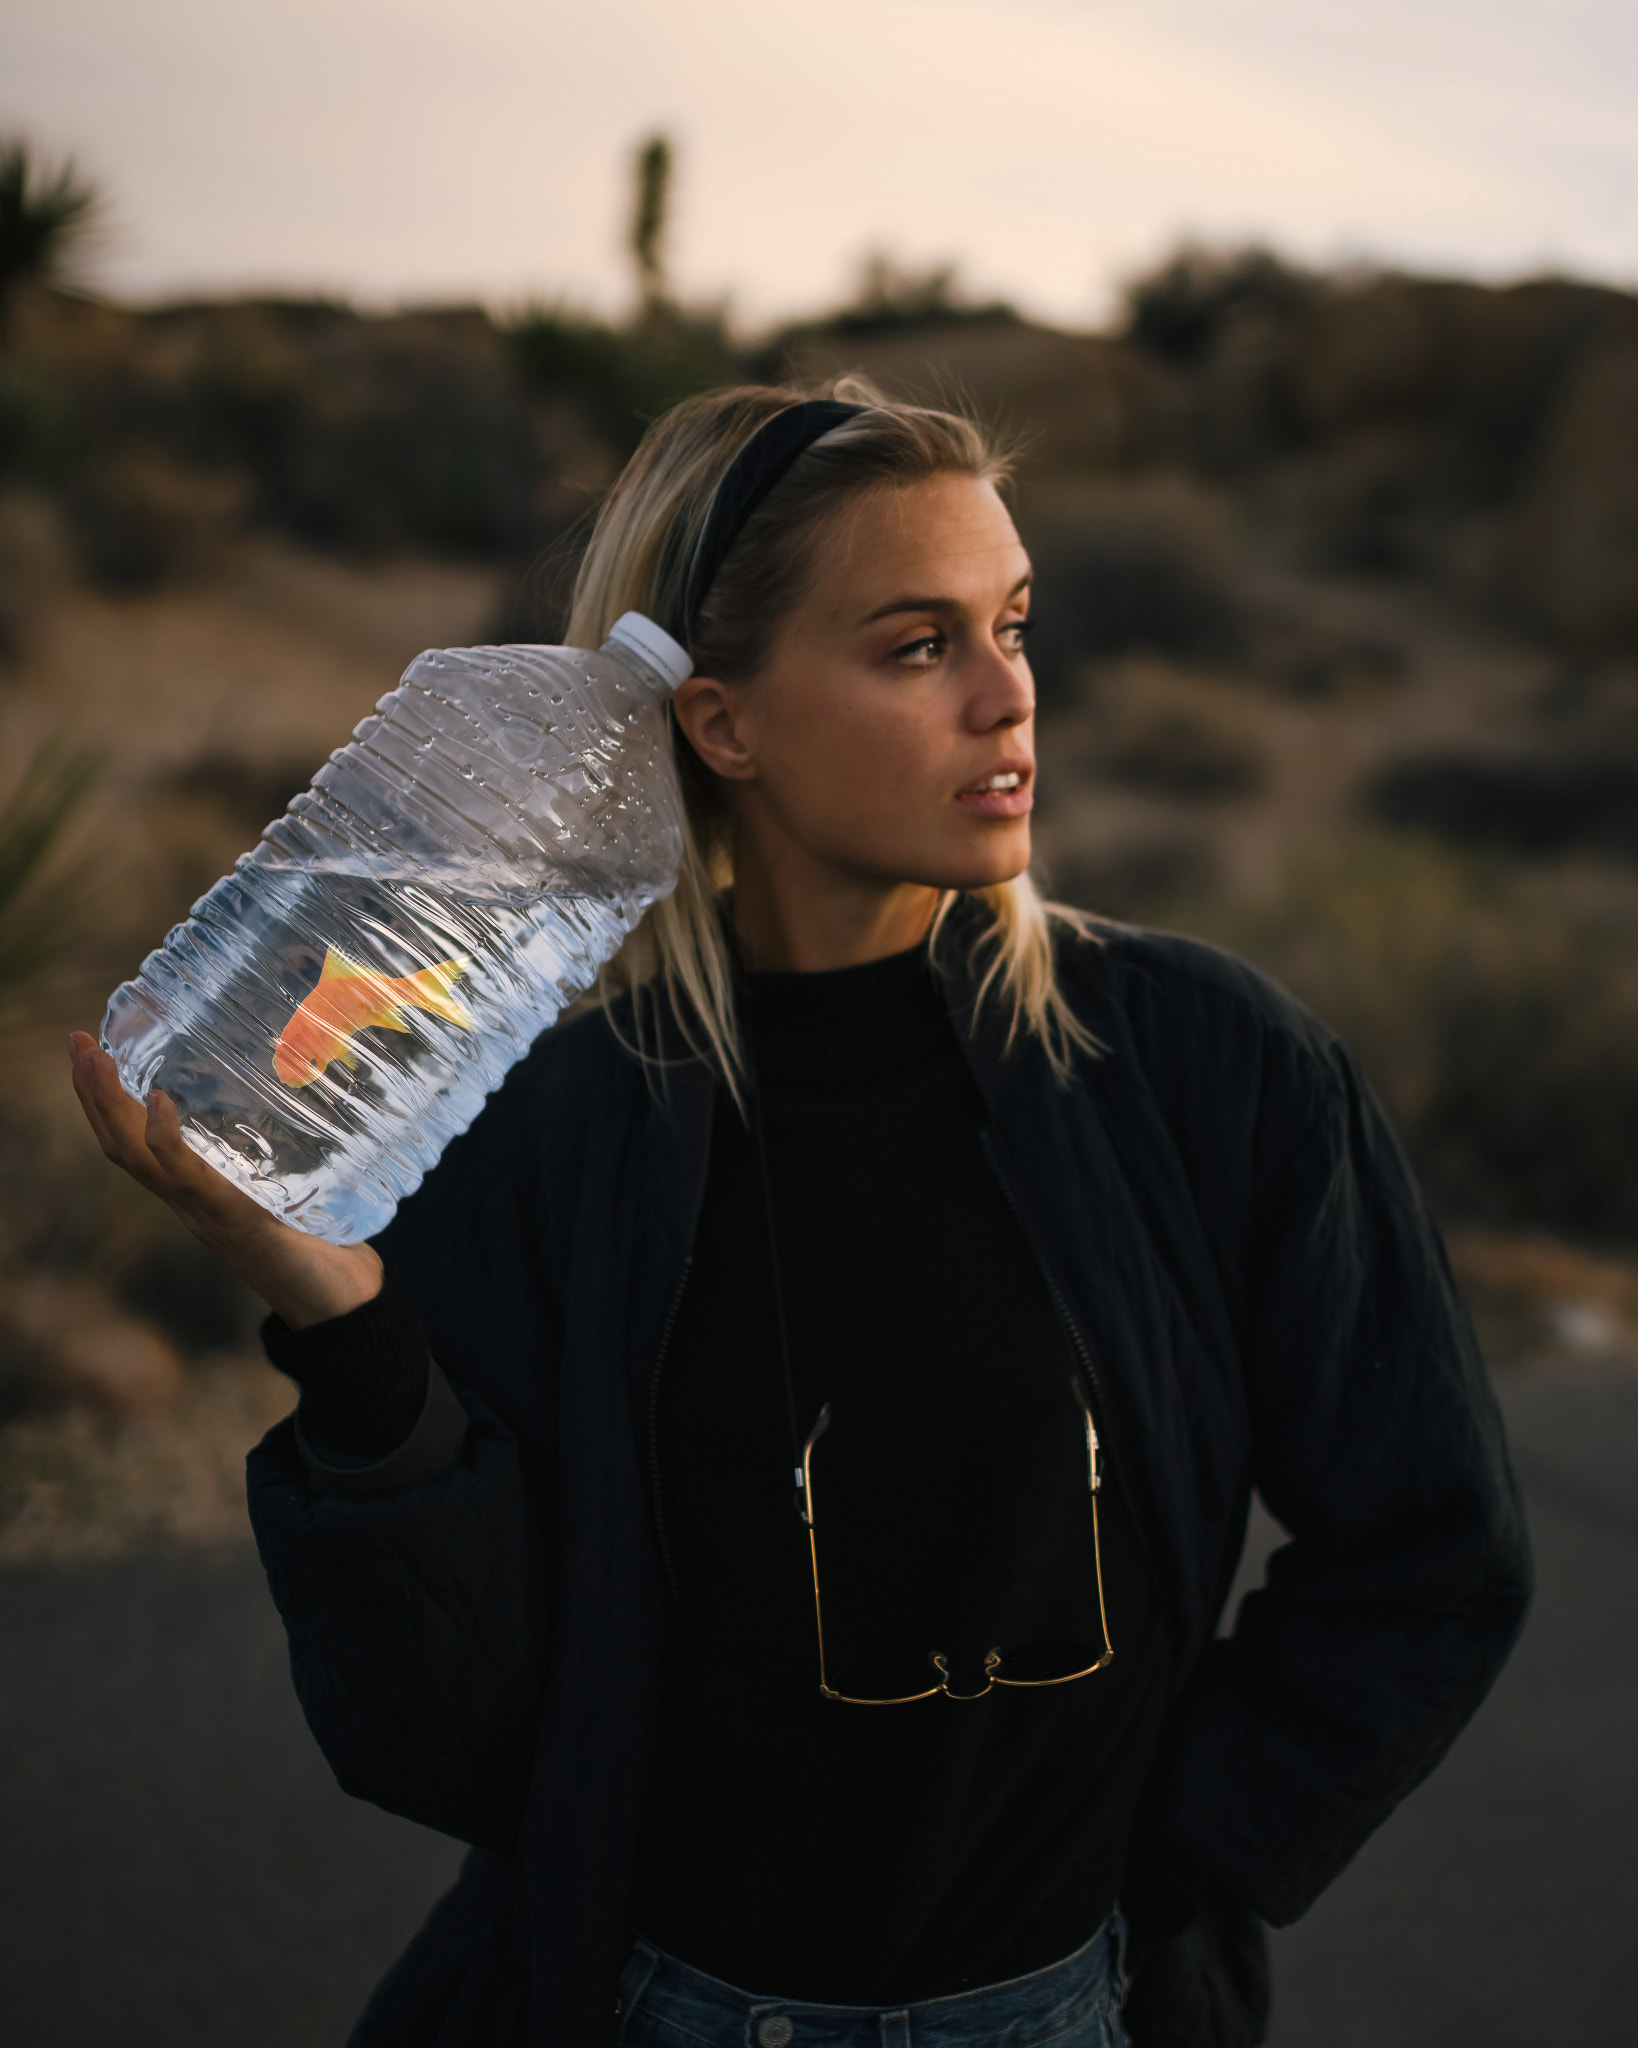 Sony a7R II sample photo. Gotta stay hydrated in the desert folks! photography